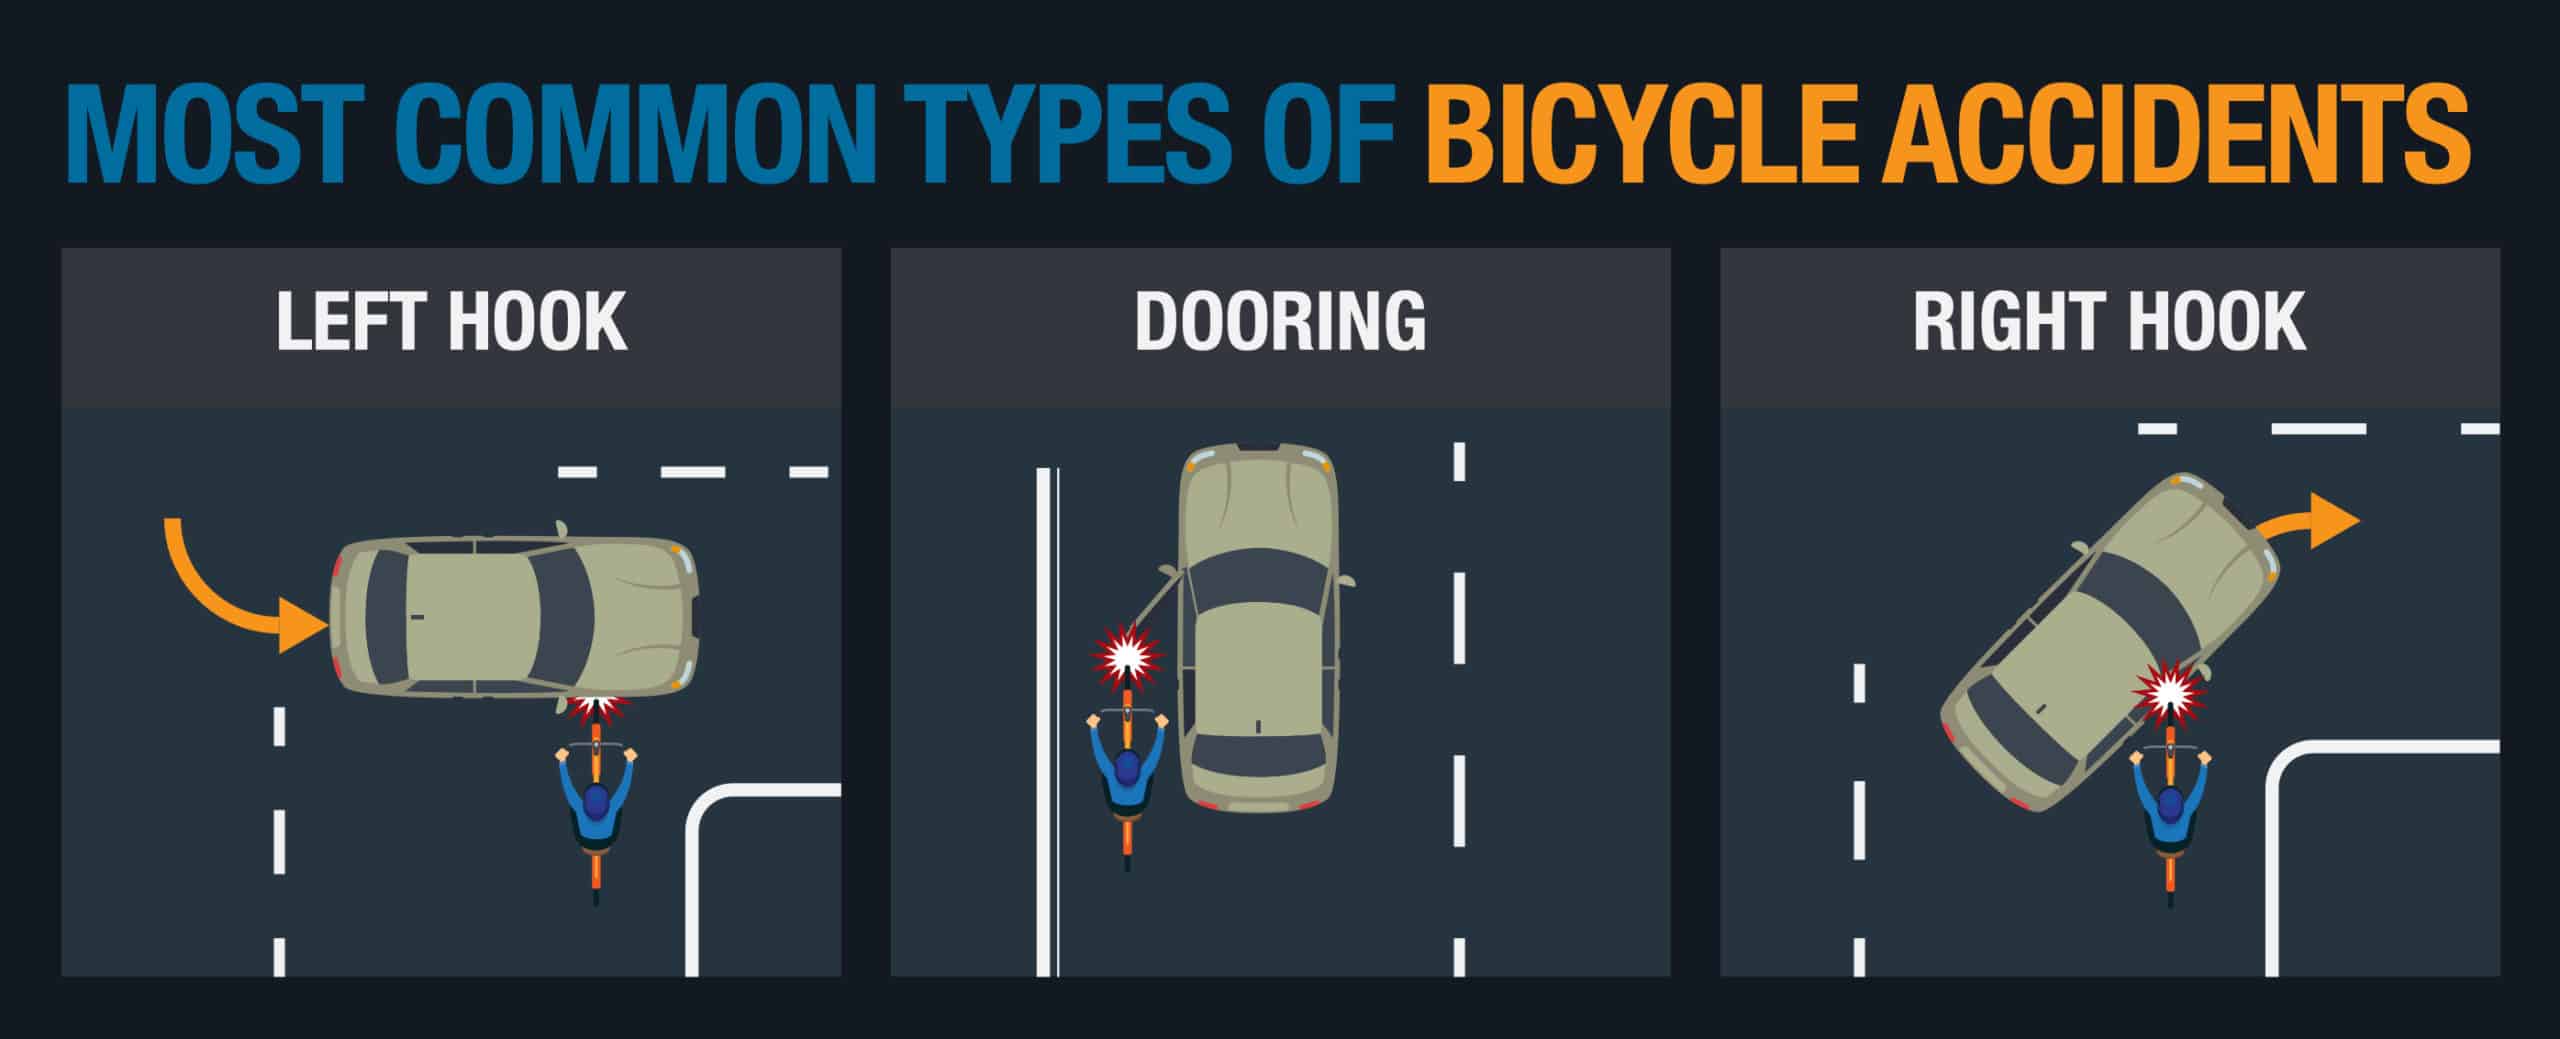 common ways cars hit bikes: left hook, right hook and dooring